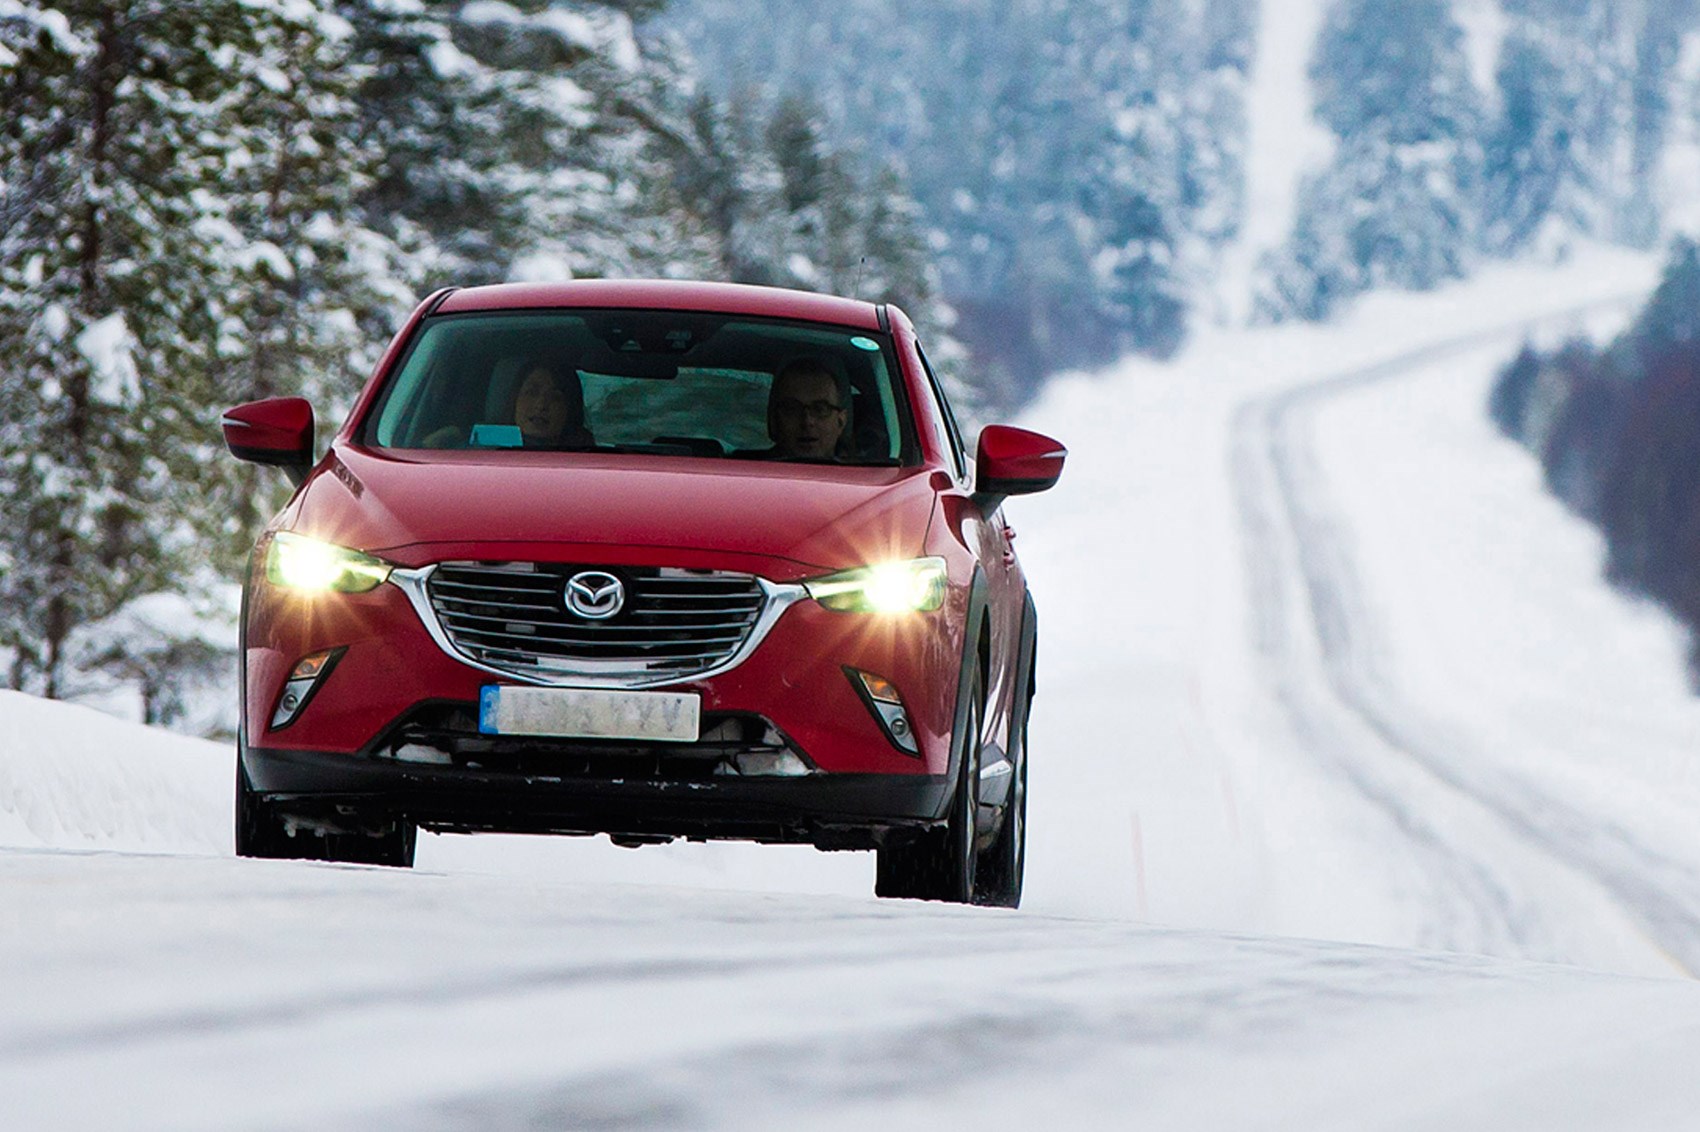 Arctic role play: all-wheel-drive Mazda CX-3 tested to extremes